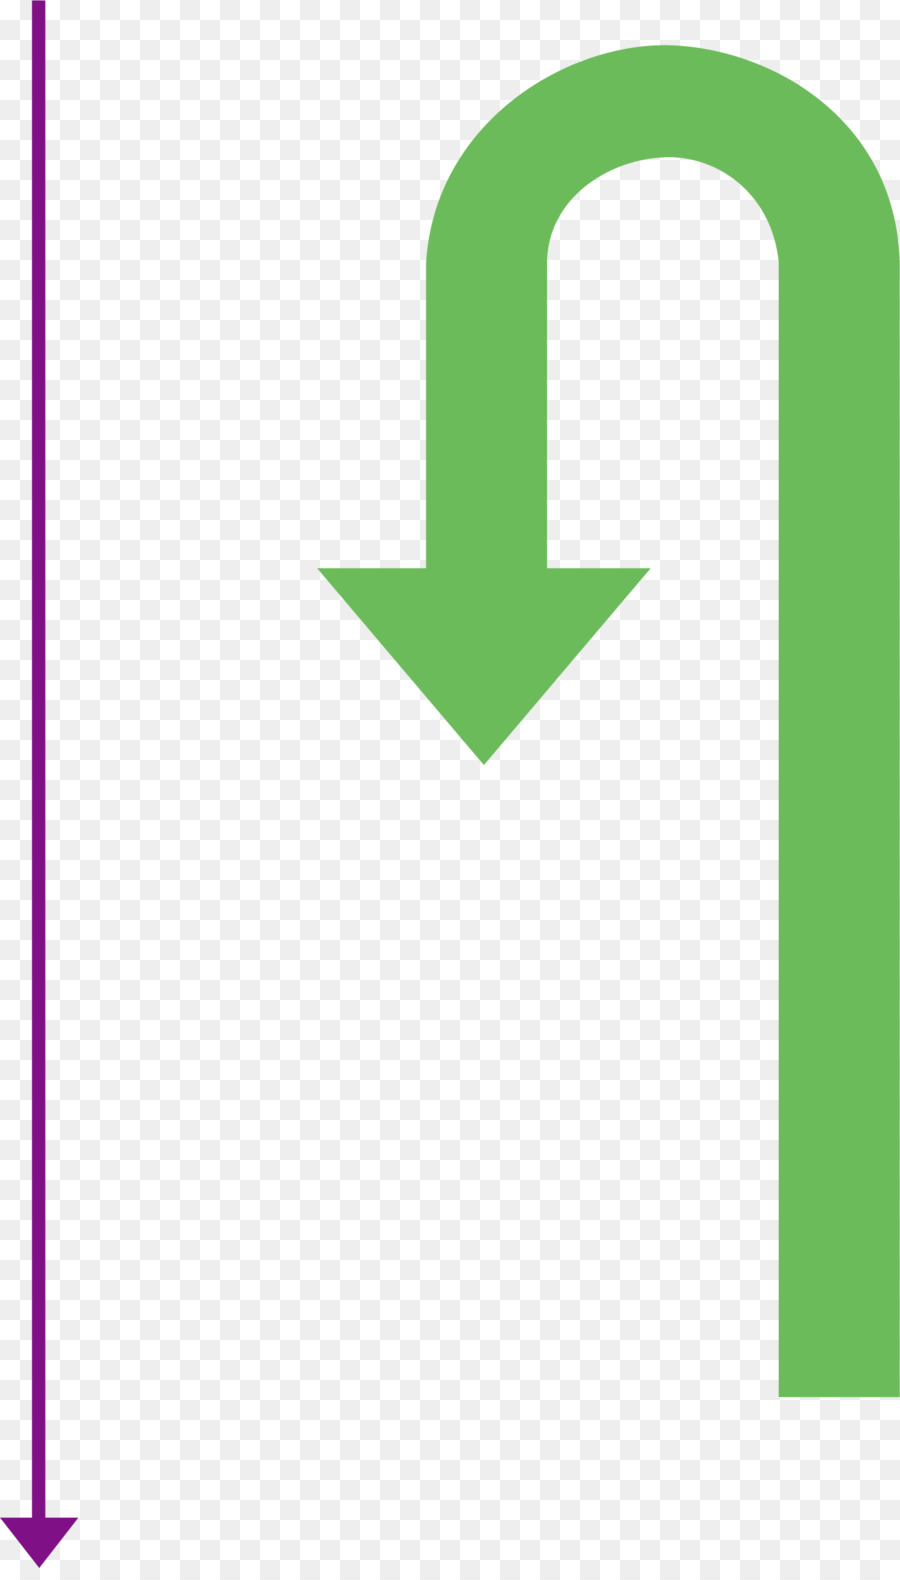 Arrow Download Icon - Down arrow gif png download - 1484*2585 - Free Transparent Arrow png Download.